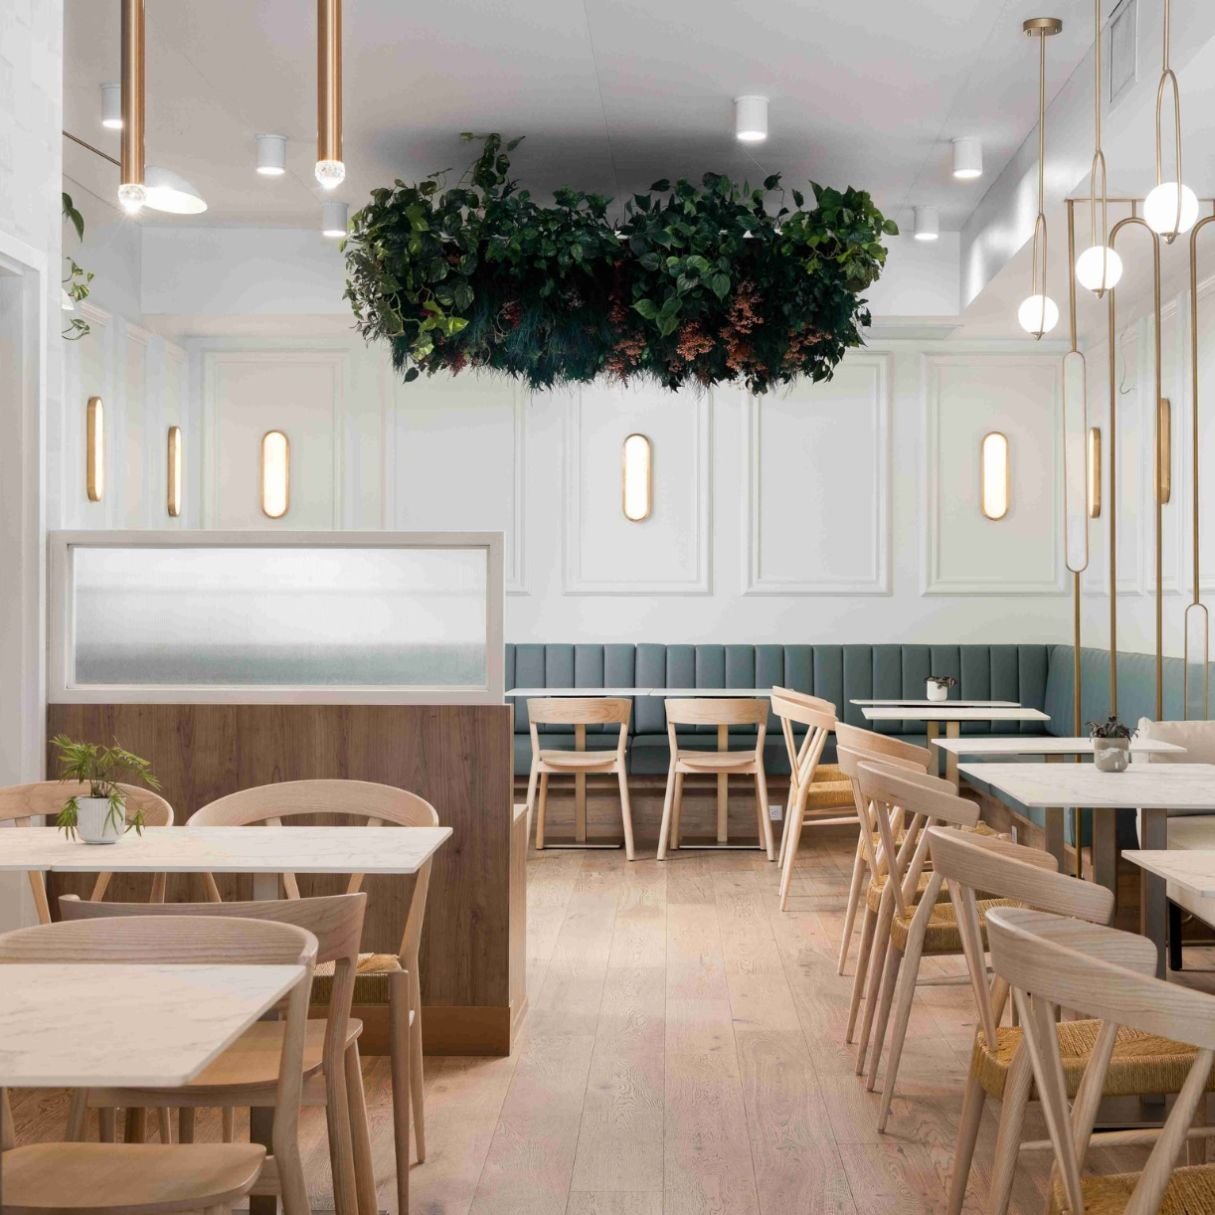 At Tabule Midtown, our aim was to blend modern sophistication with traditional Middle Eastern charm.

We achieved this by incorporating contemporary interpretations of color, materials, and ambiance, steering clear of overtly traditional Mediterranea